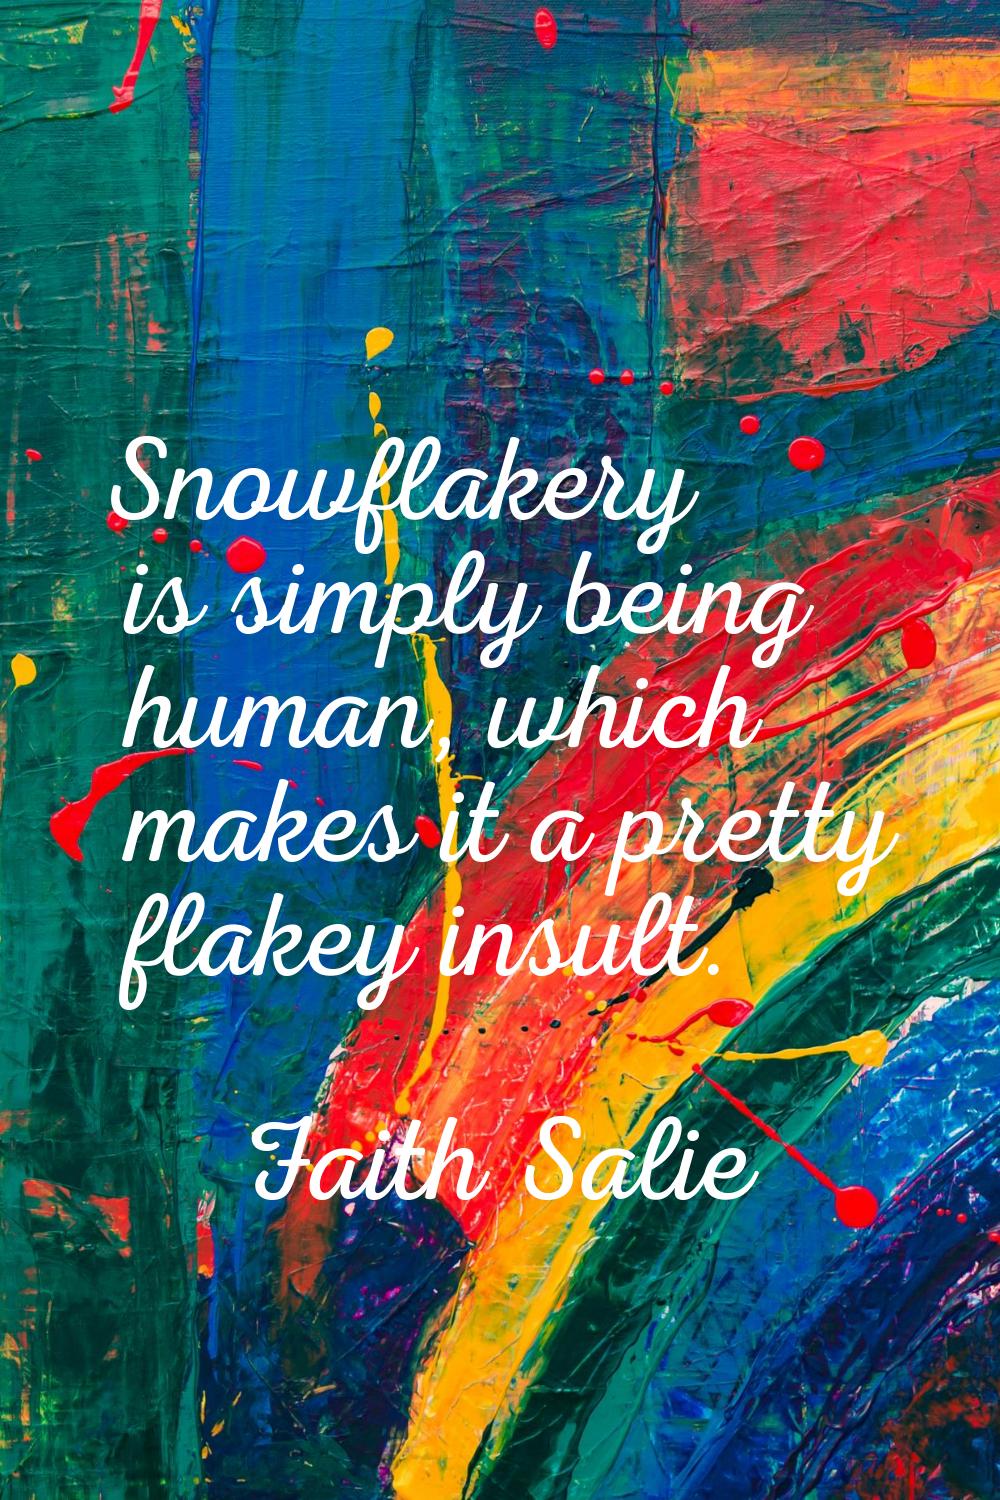 Snowflakery is simply being human, which makes it a pretty flakey insult.